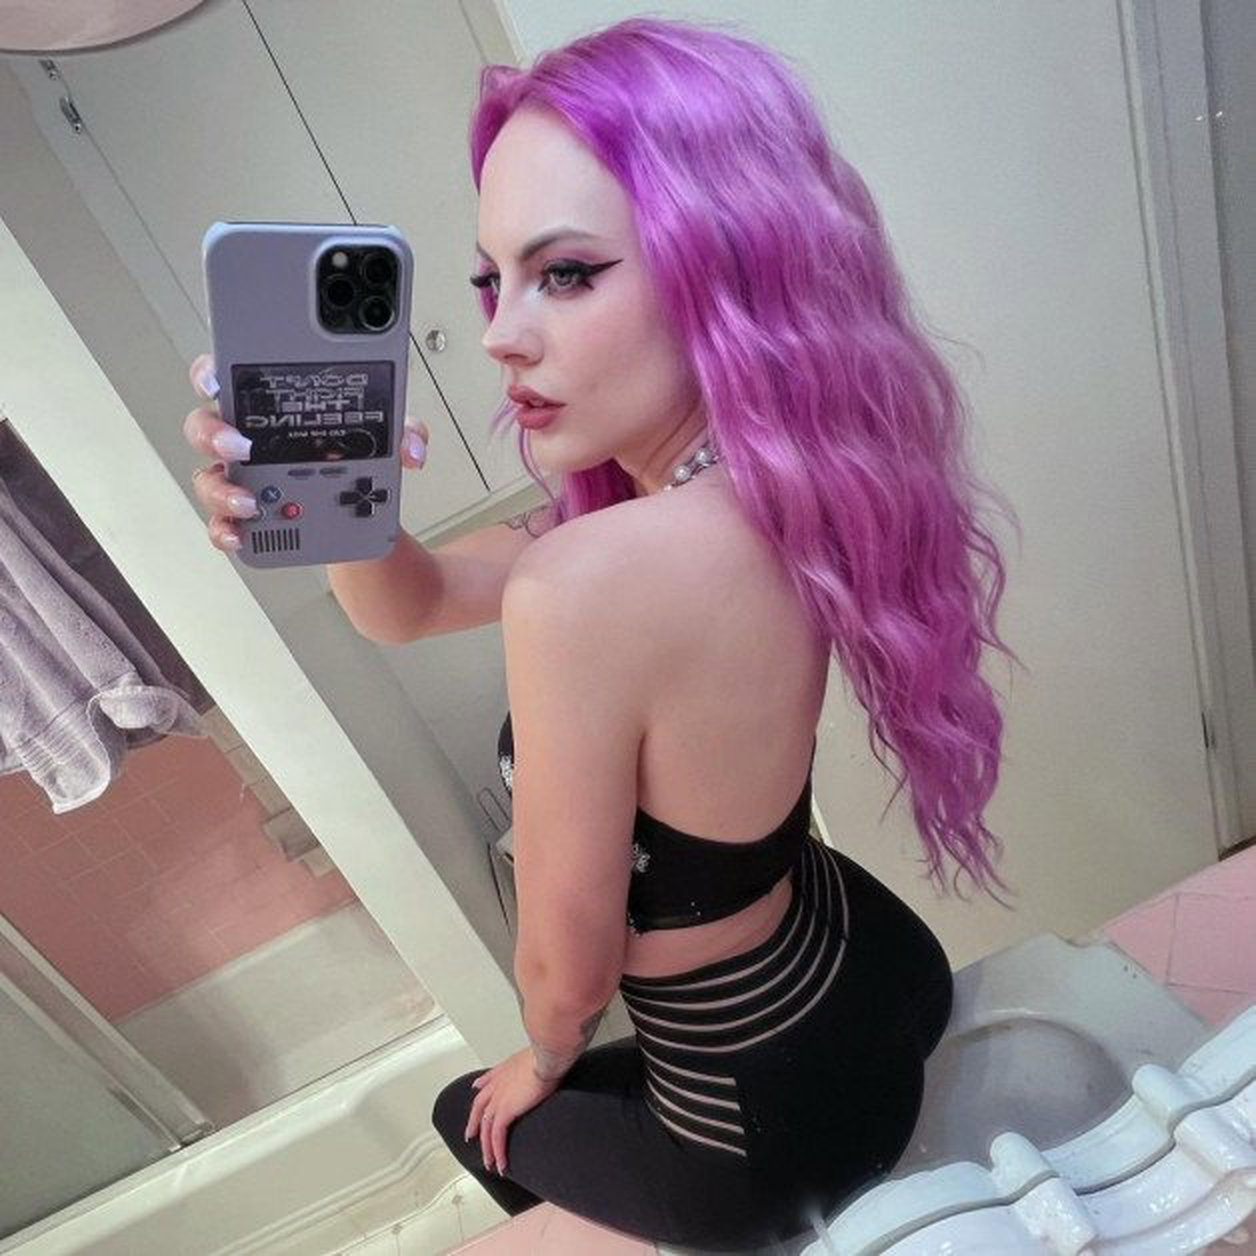 Photo by Ruinedcarpet with the username @Ruinedcarpet,  September 1, 2022 at 4:19 PM. The post is about the topic RC's Mirror Selfies and the text says 'Courtney Dawne.

#CourtneyDawne #Instagram #CourtneyDawne_ #Cute #Hot #Alternative #BlackClothes #Babe #PurpleHair #Pale #PastelGirl #CuloEncimero #Beauty #Cutie #GfMaterial #AltGirl #Bath #MirrorSelfie #Hottie #PurpleHaired #PaleGirl #Cuteness #Pretty..'